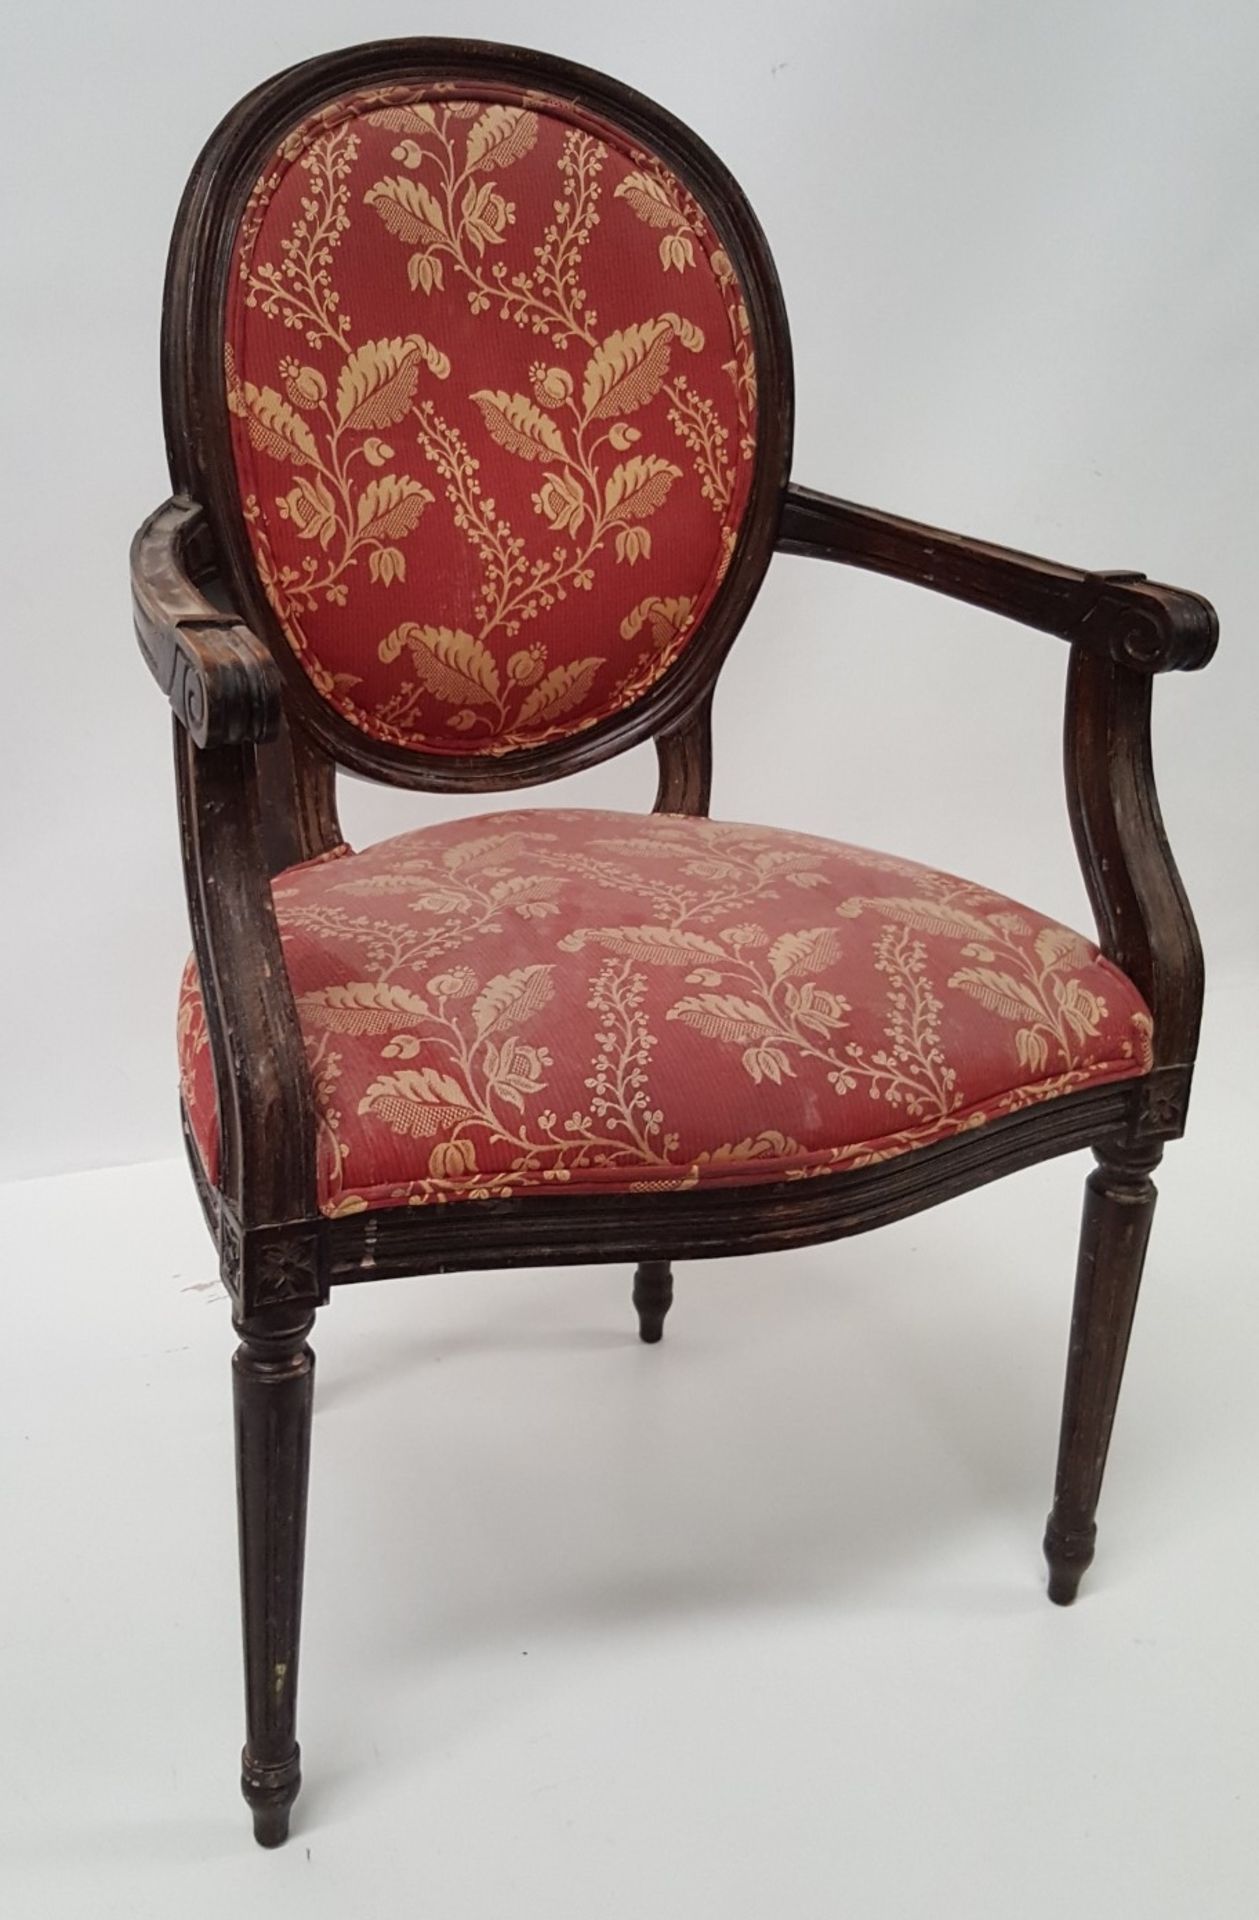 6 x Antique Style Wooden Chairs Upholstered In Red Fabric With Gold Leaf Design - CL431 - Image 8 of 8